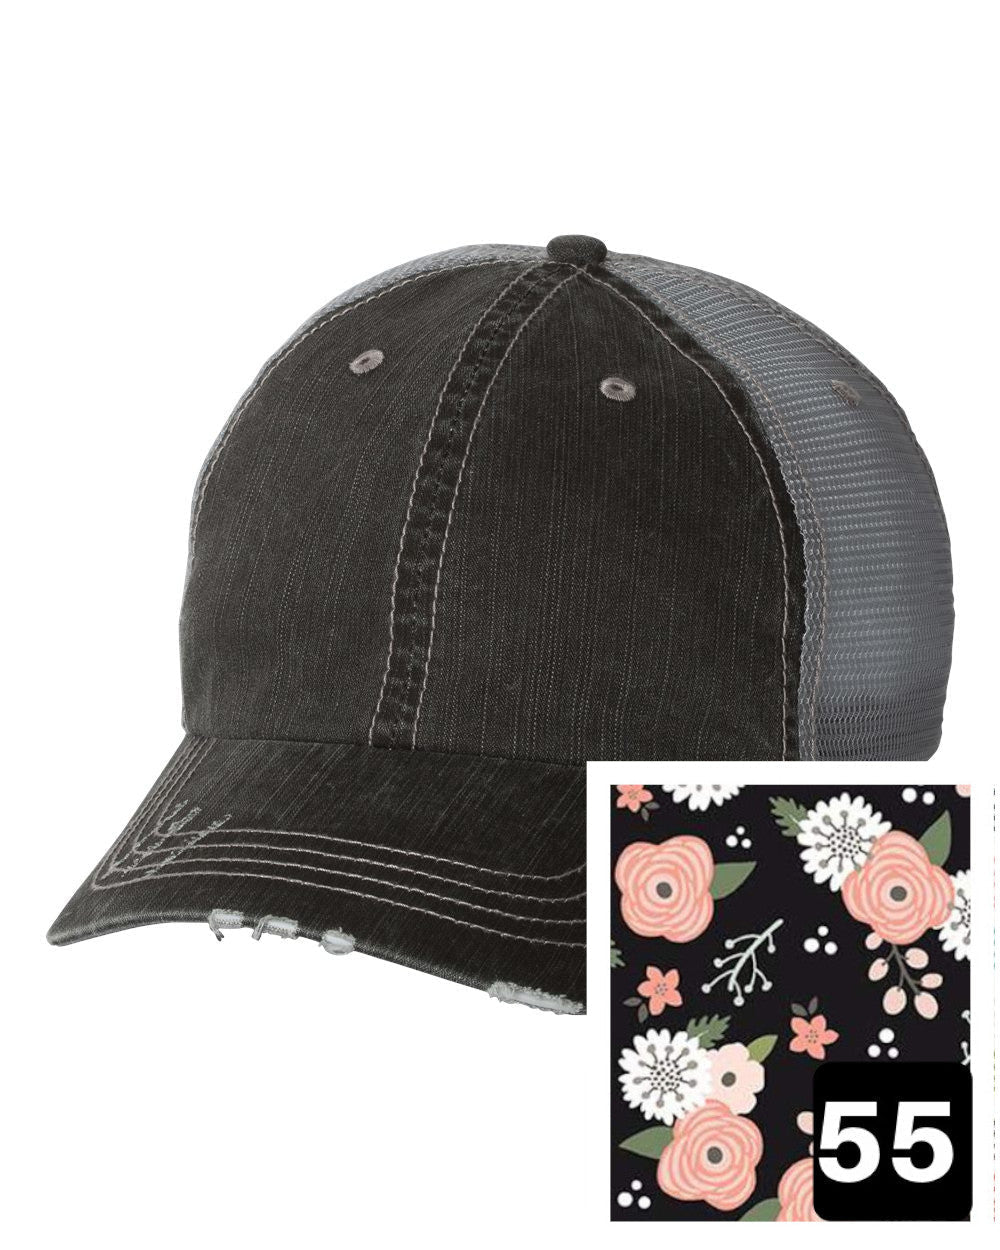 gray distressed trucker hat with petite floral on navy fabric state of Utah